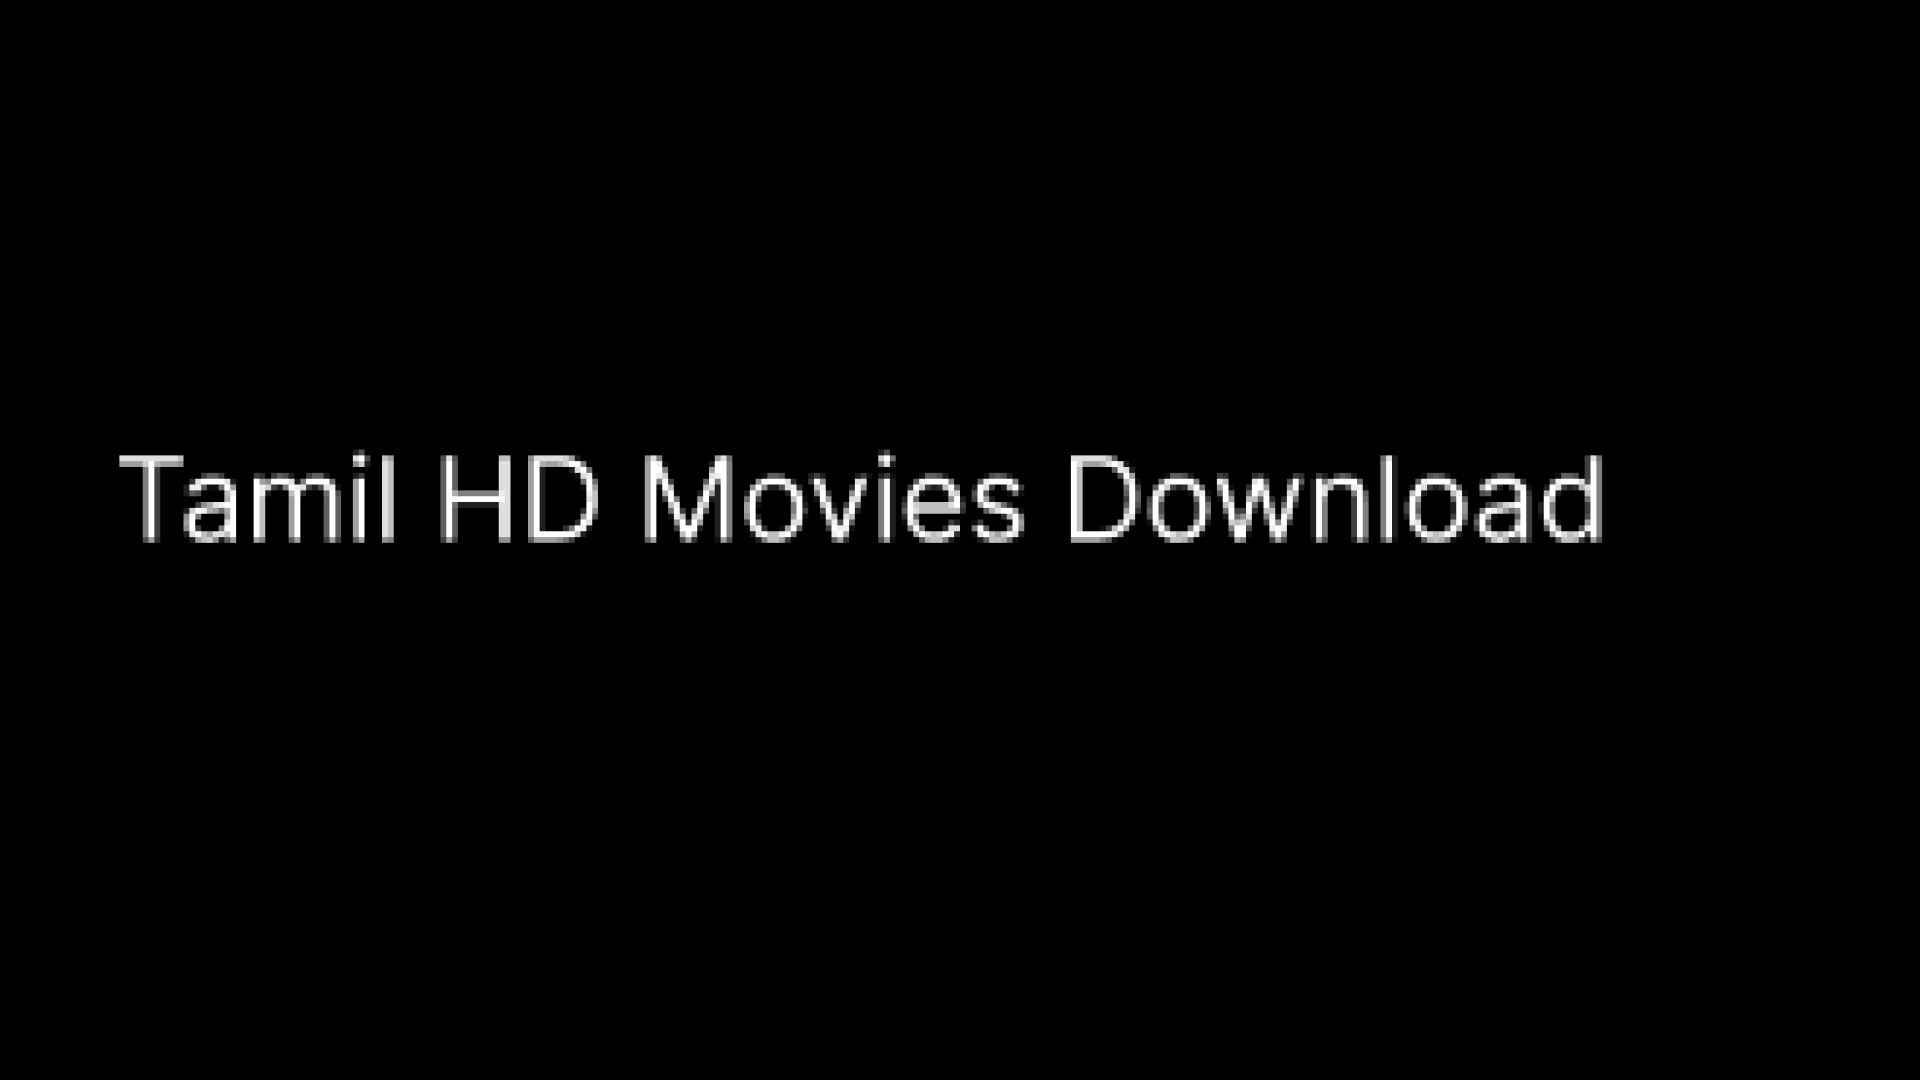 Tamil HD Movies Download and Free Sites to Watch